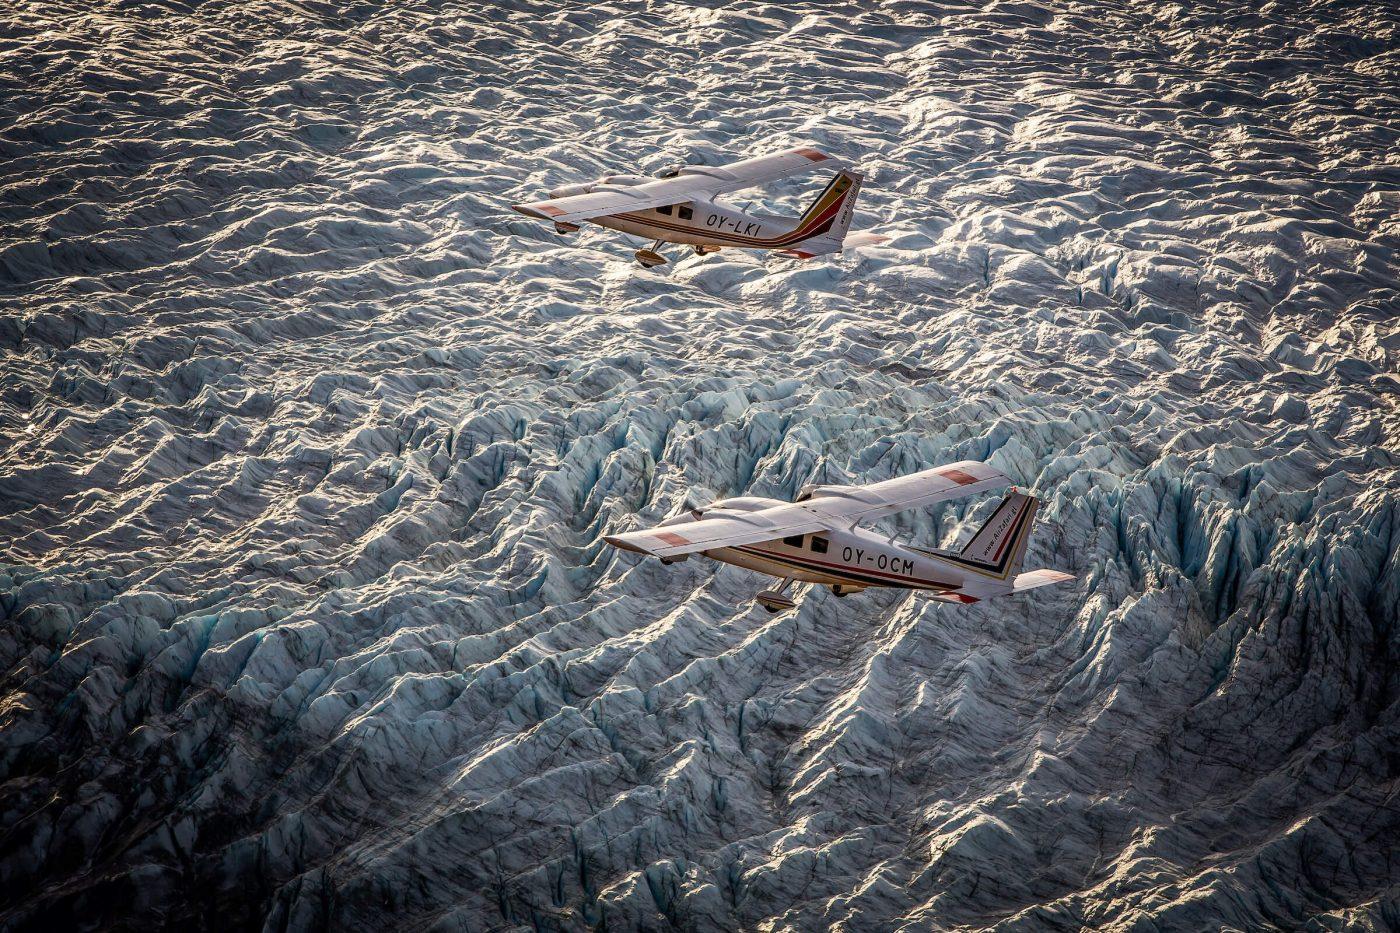 Two Air Zafari flightseeing planes over the Greenland Ice Sheet near Kangerlussuaq Airport. By Mads Pihl